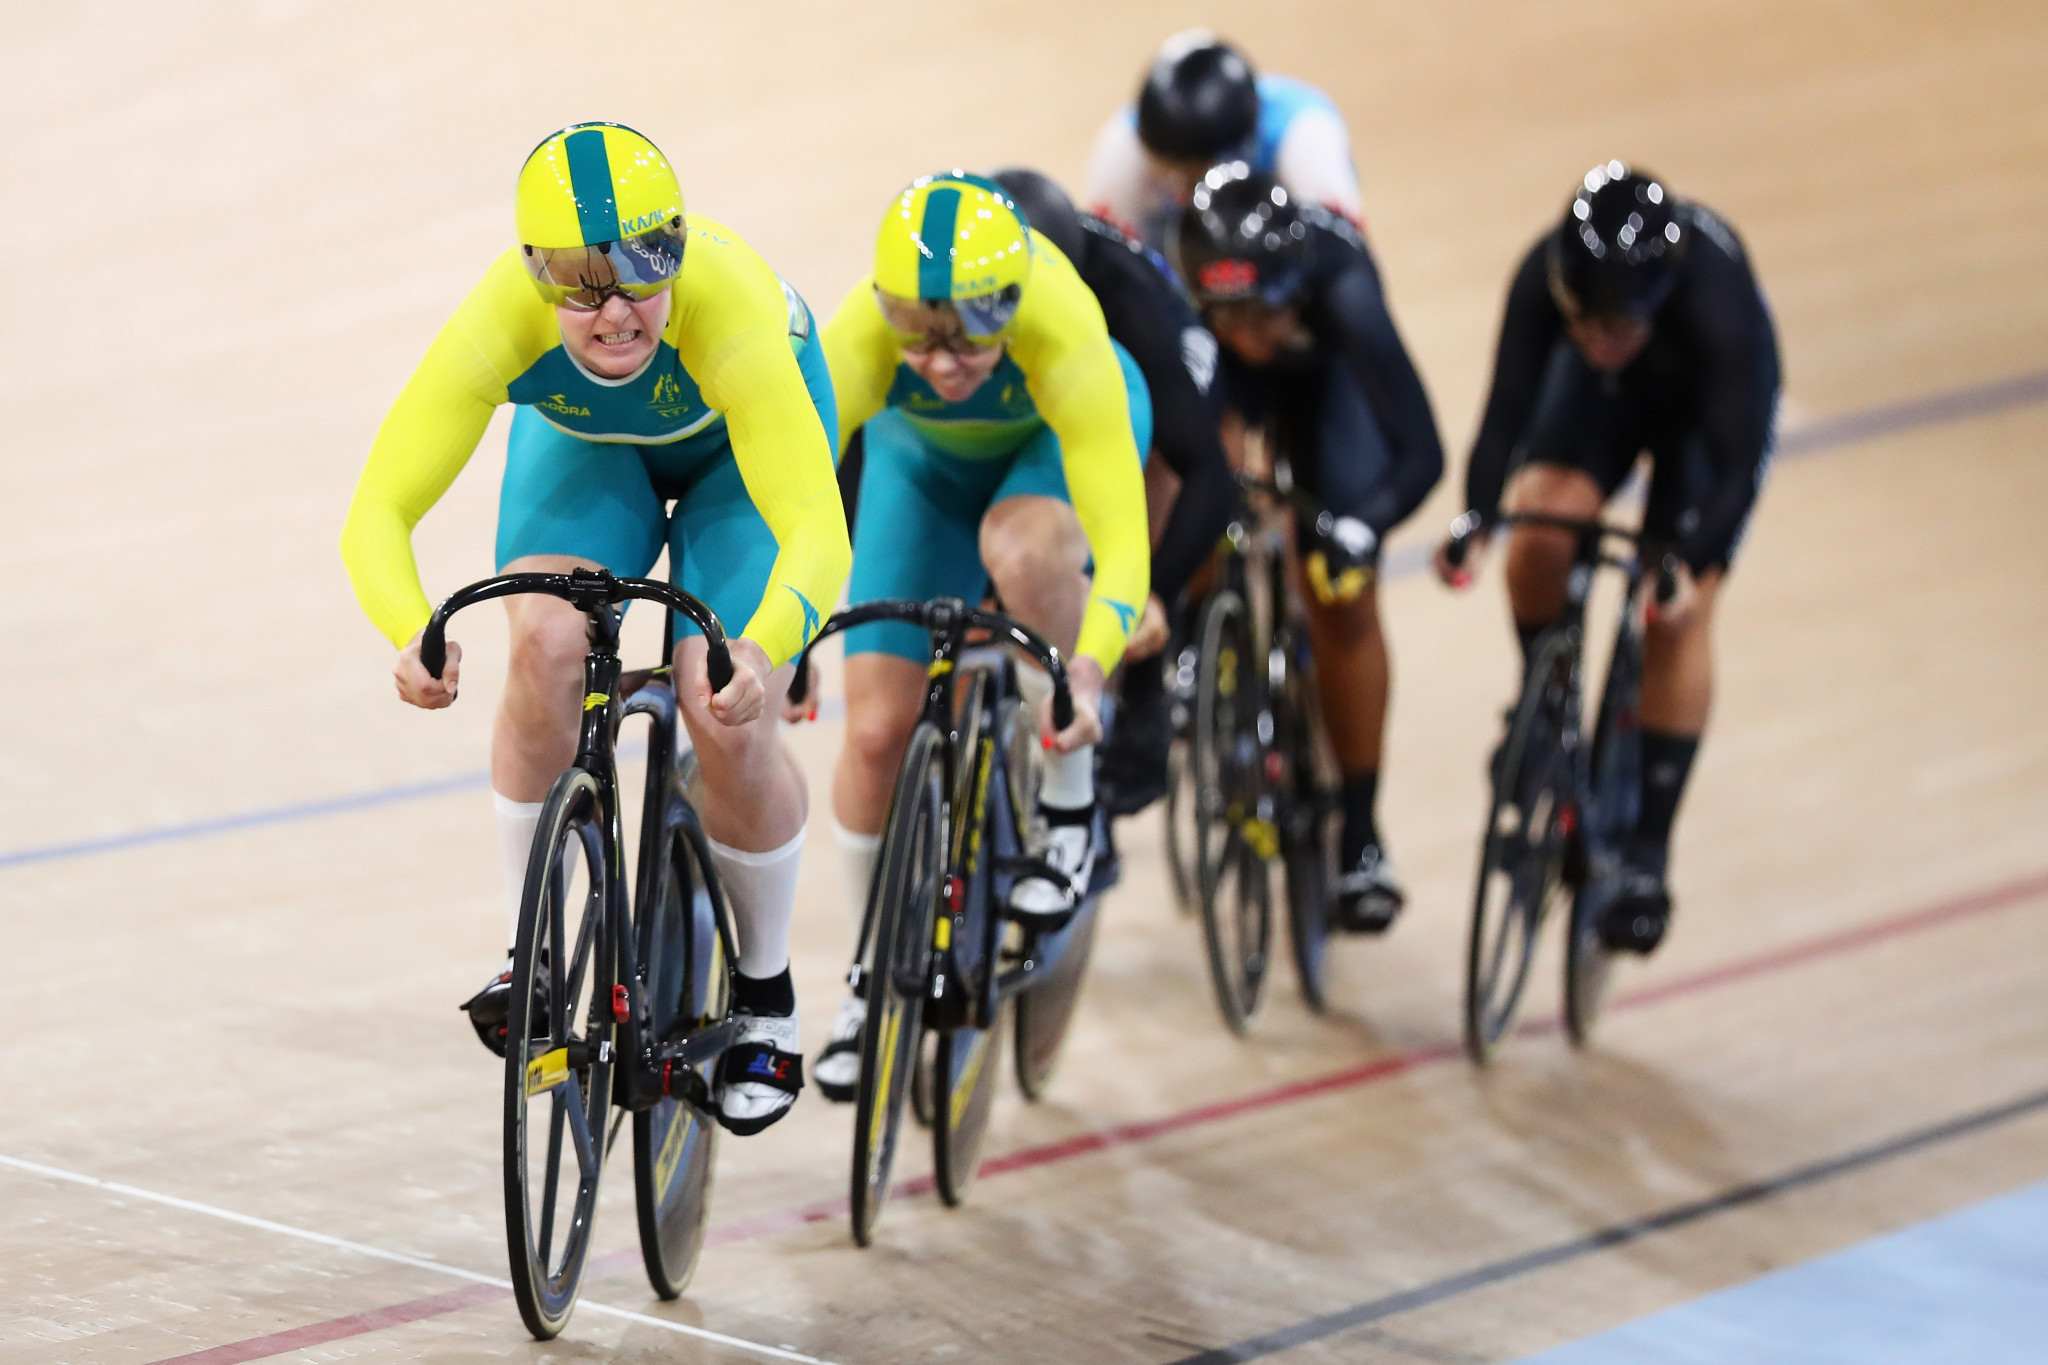 Stephanie Morton claimed her third gold medal of the Games by winning the women's keirin ©Getty Images